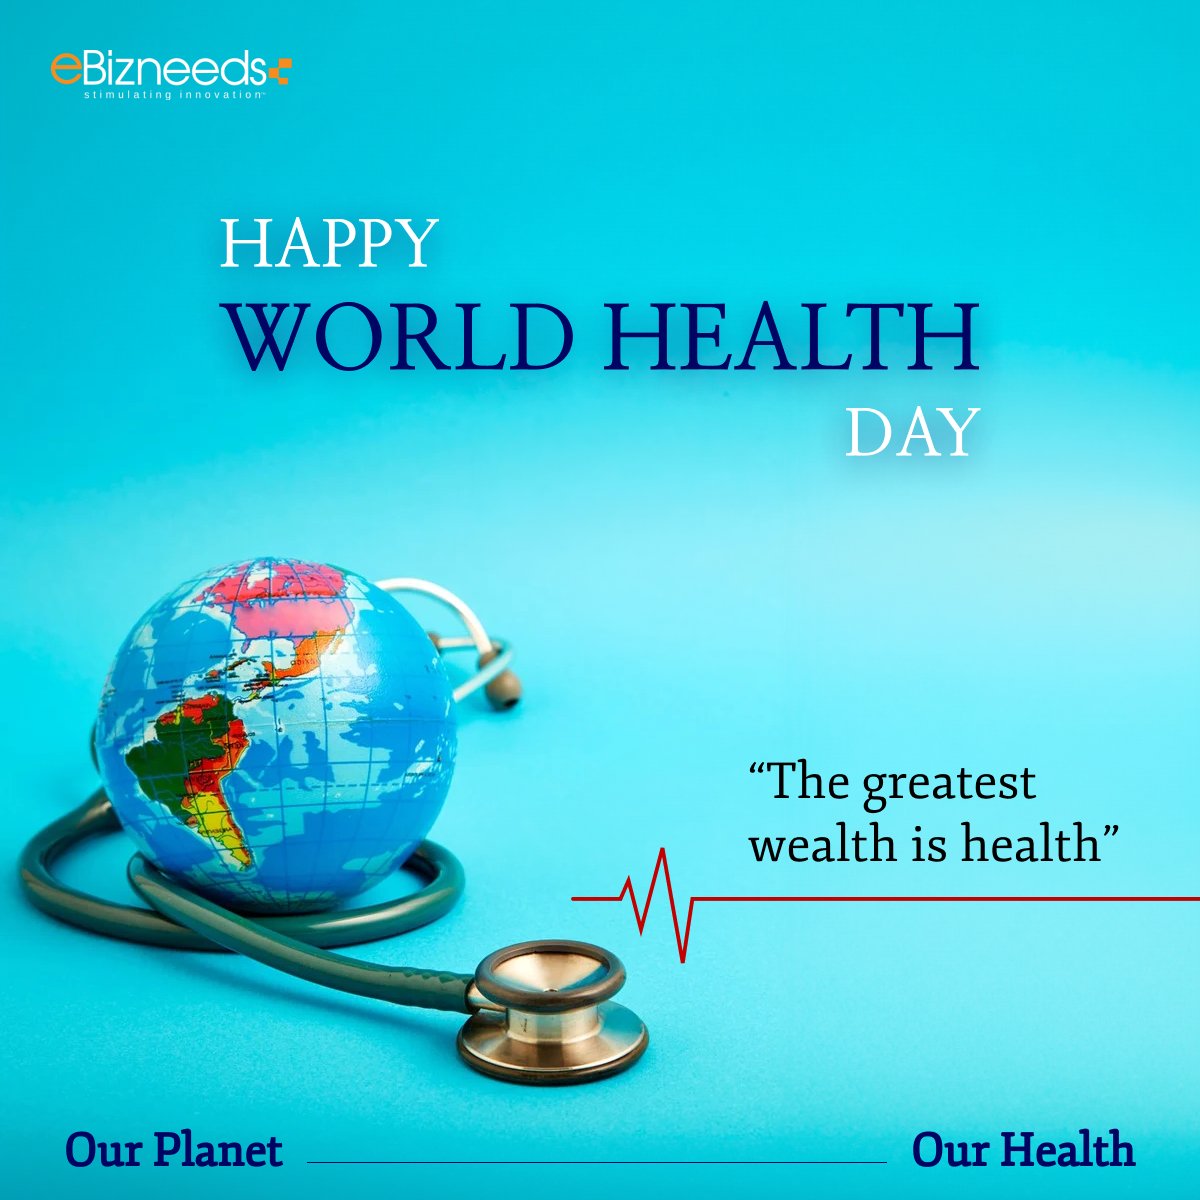 Happy World Health Day from eBizneeds! We believe that technology can help us create a healthier world. Let's work together to use technology to make the world a brighter and healthier place for everyone.
#HappyWorldHealthDay #HappyWorldHealthDay2024
#WorldHealthDay #eBizneeds